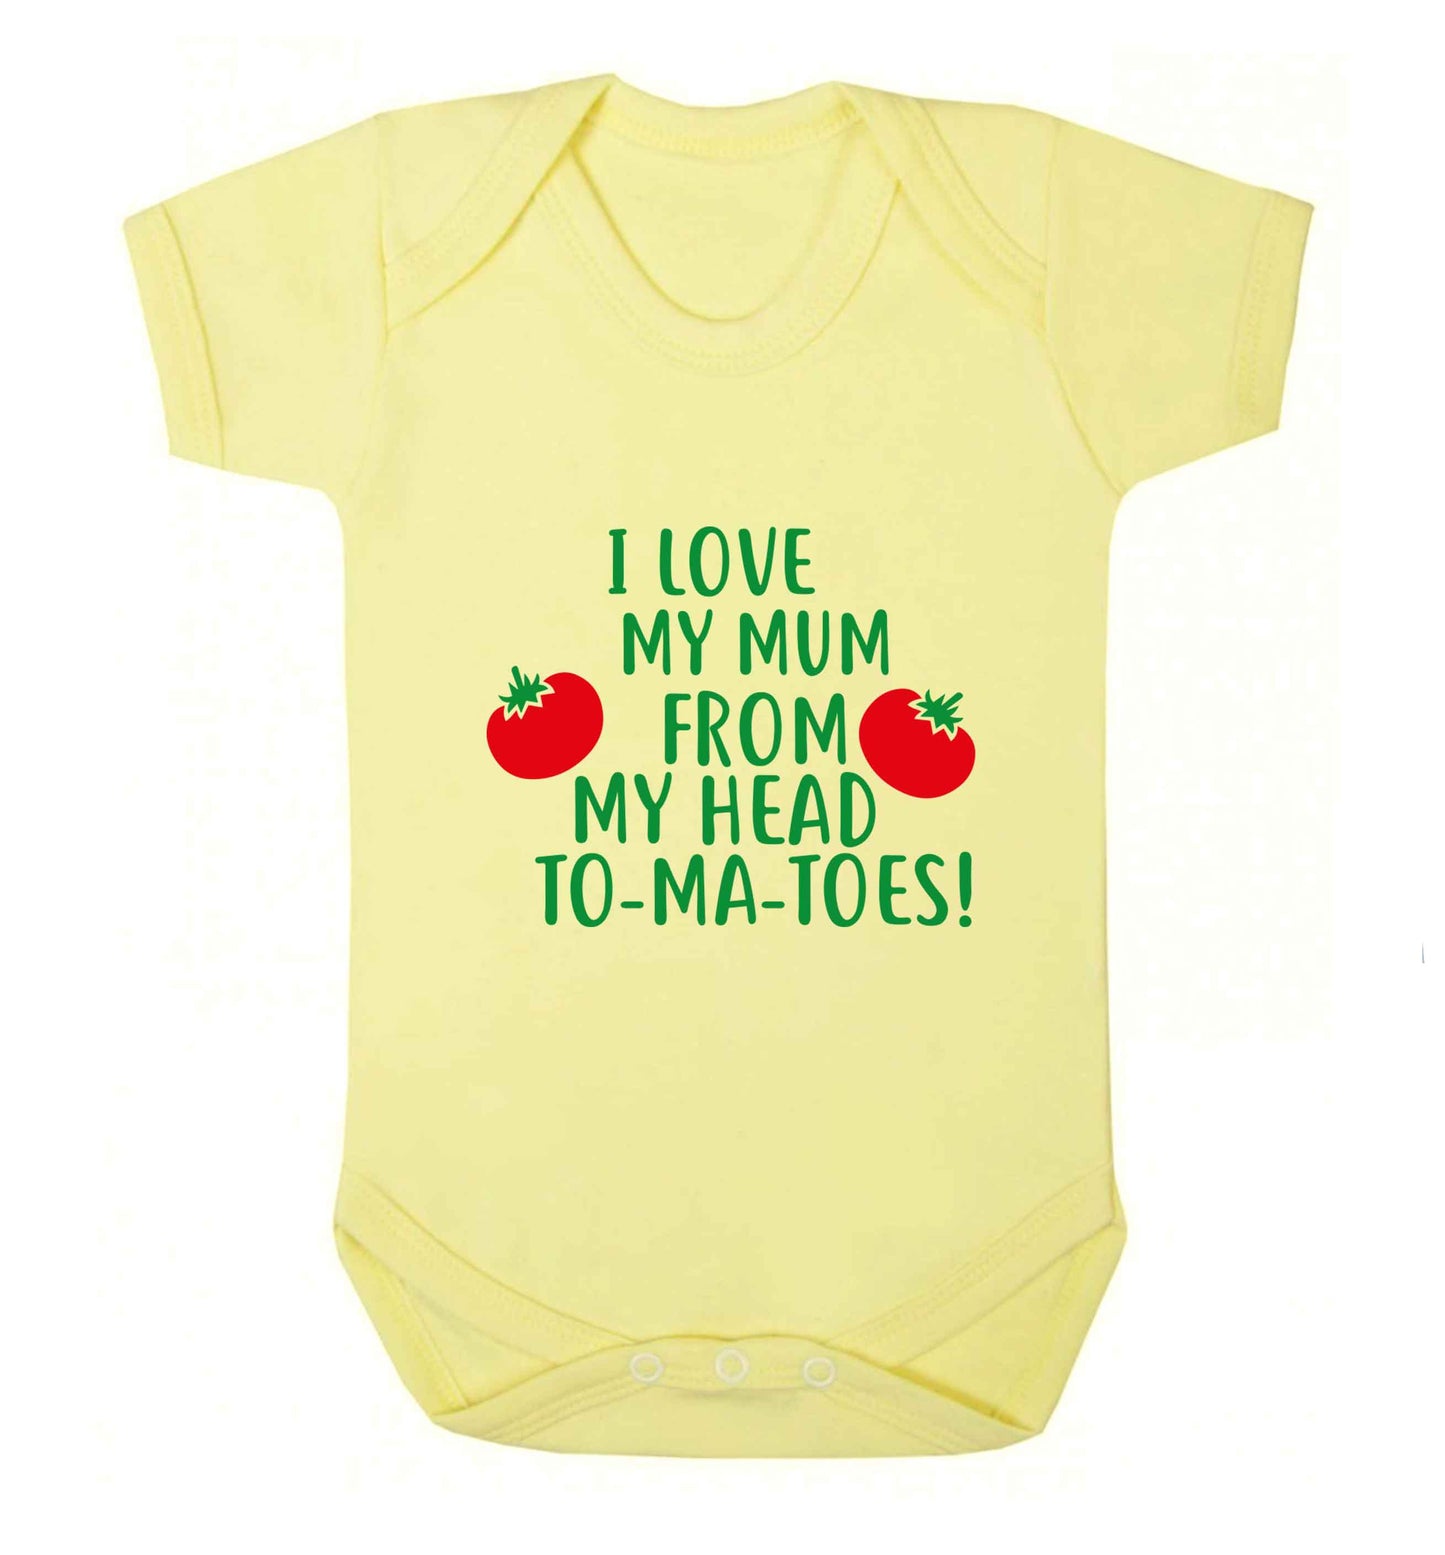 I love my mum from my head to-my-toes! baby vest pale yellow 18-24 months